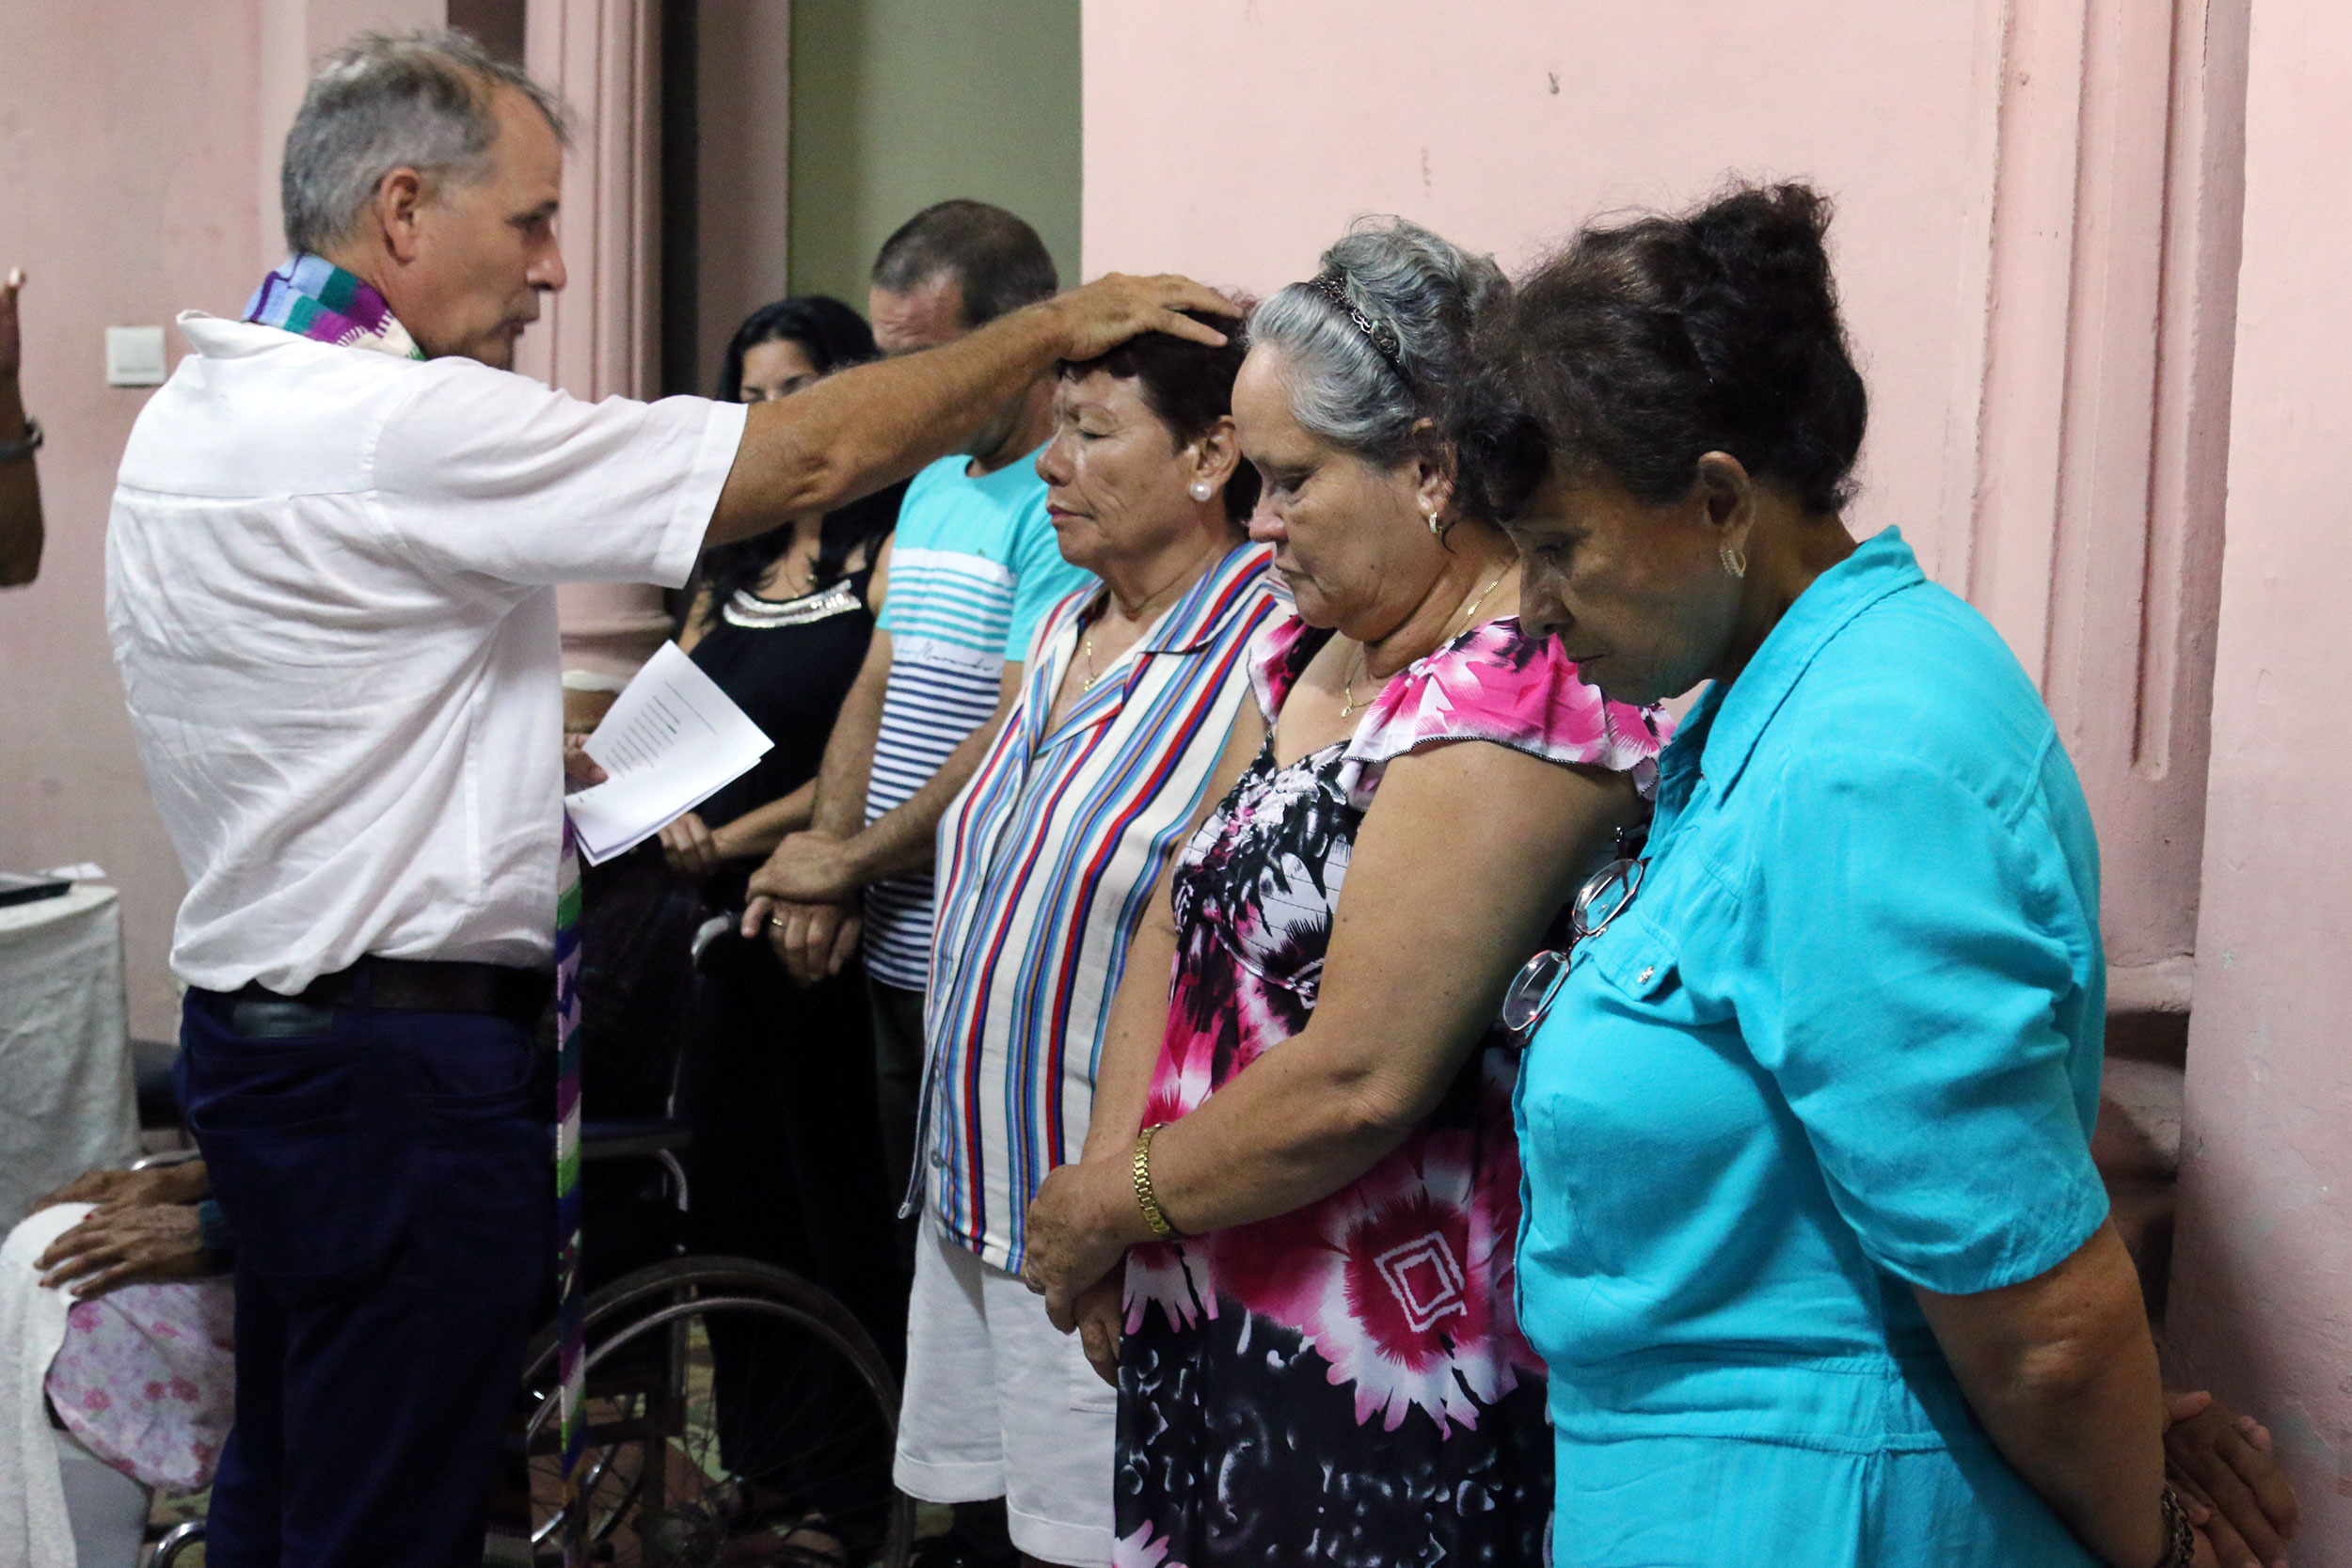 Ary Fernandez baptizes Xiomara Alonso as other new members of the Presbyterian Mission in Holguin look on.